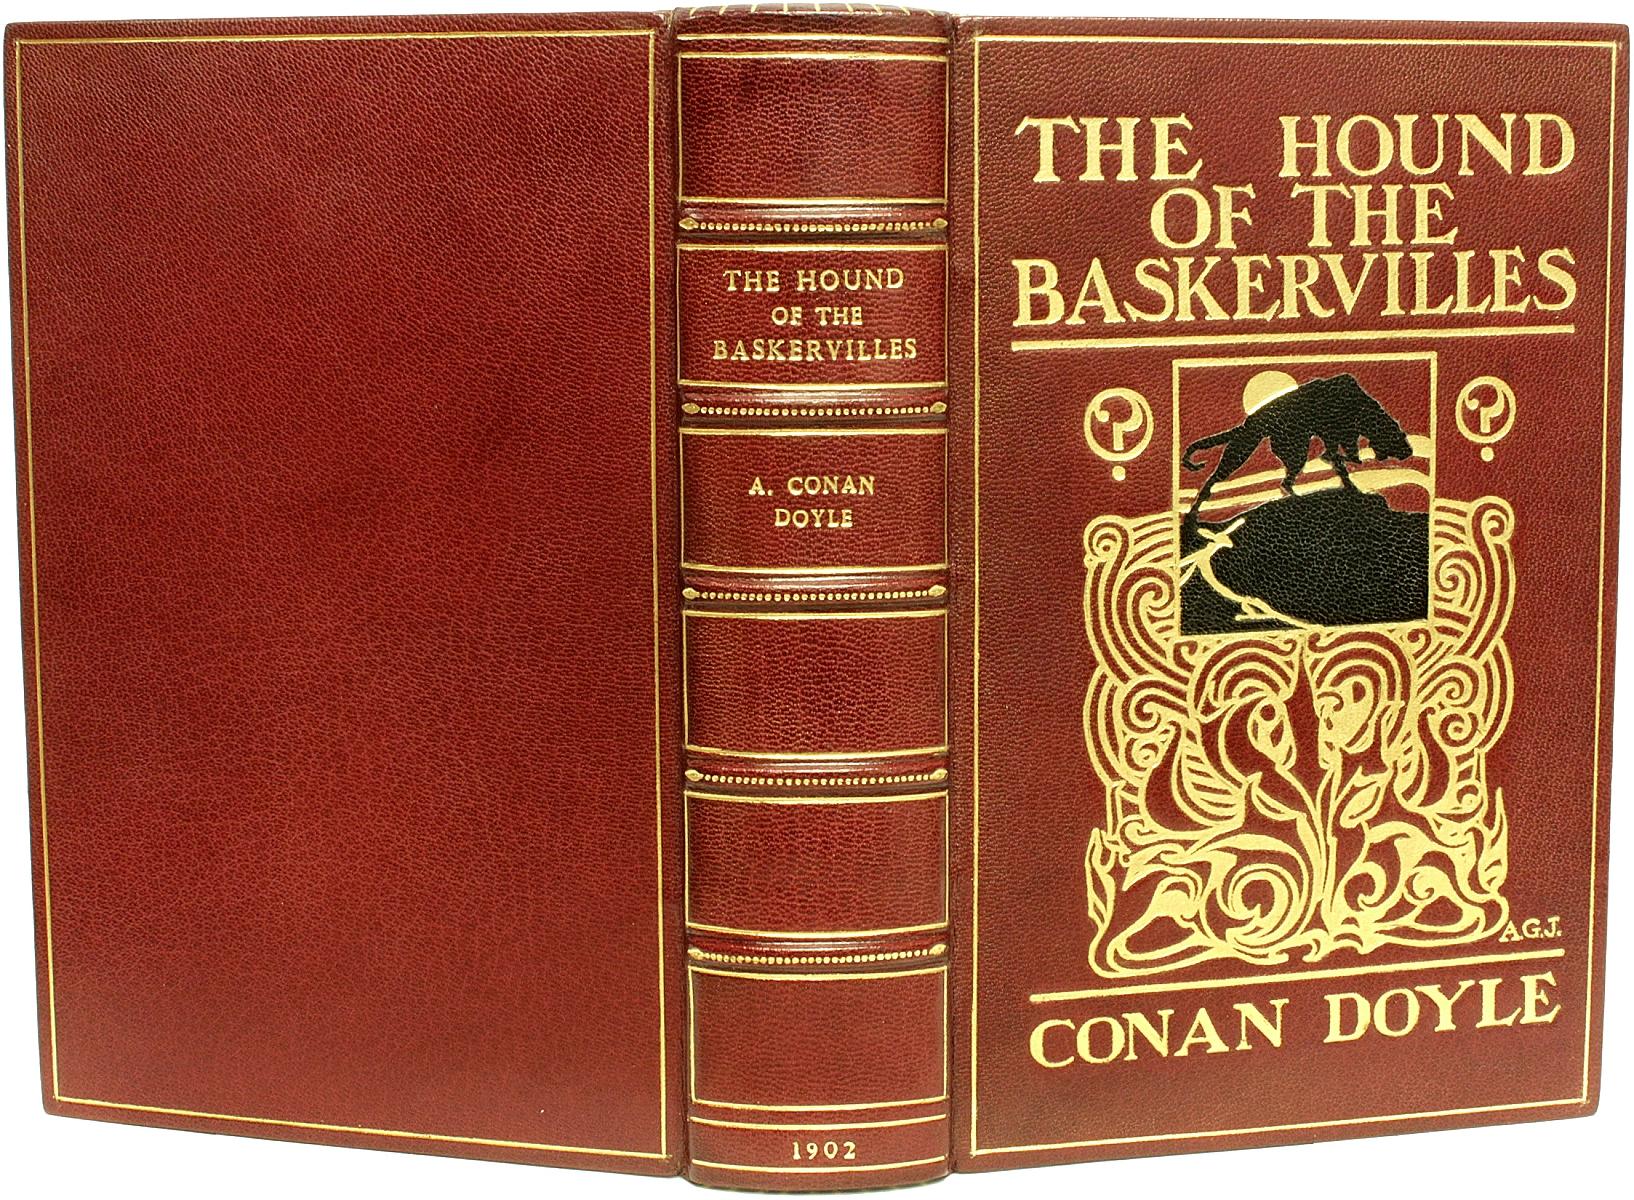 AUTHOR: DOYLE, Arthur Conan. 

TITLE: The Hound of the Baskervilles: Another Adventure of Sherlock Holmes.

PUBLISHER: London: George Newnes, Ltd., 1902.

DESCRIPTION: FIRST EDITION, FIRST PRINTING with 